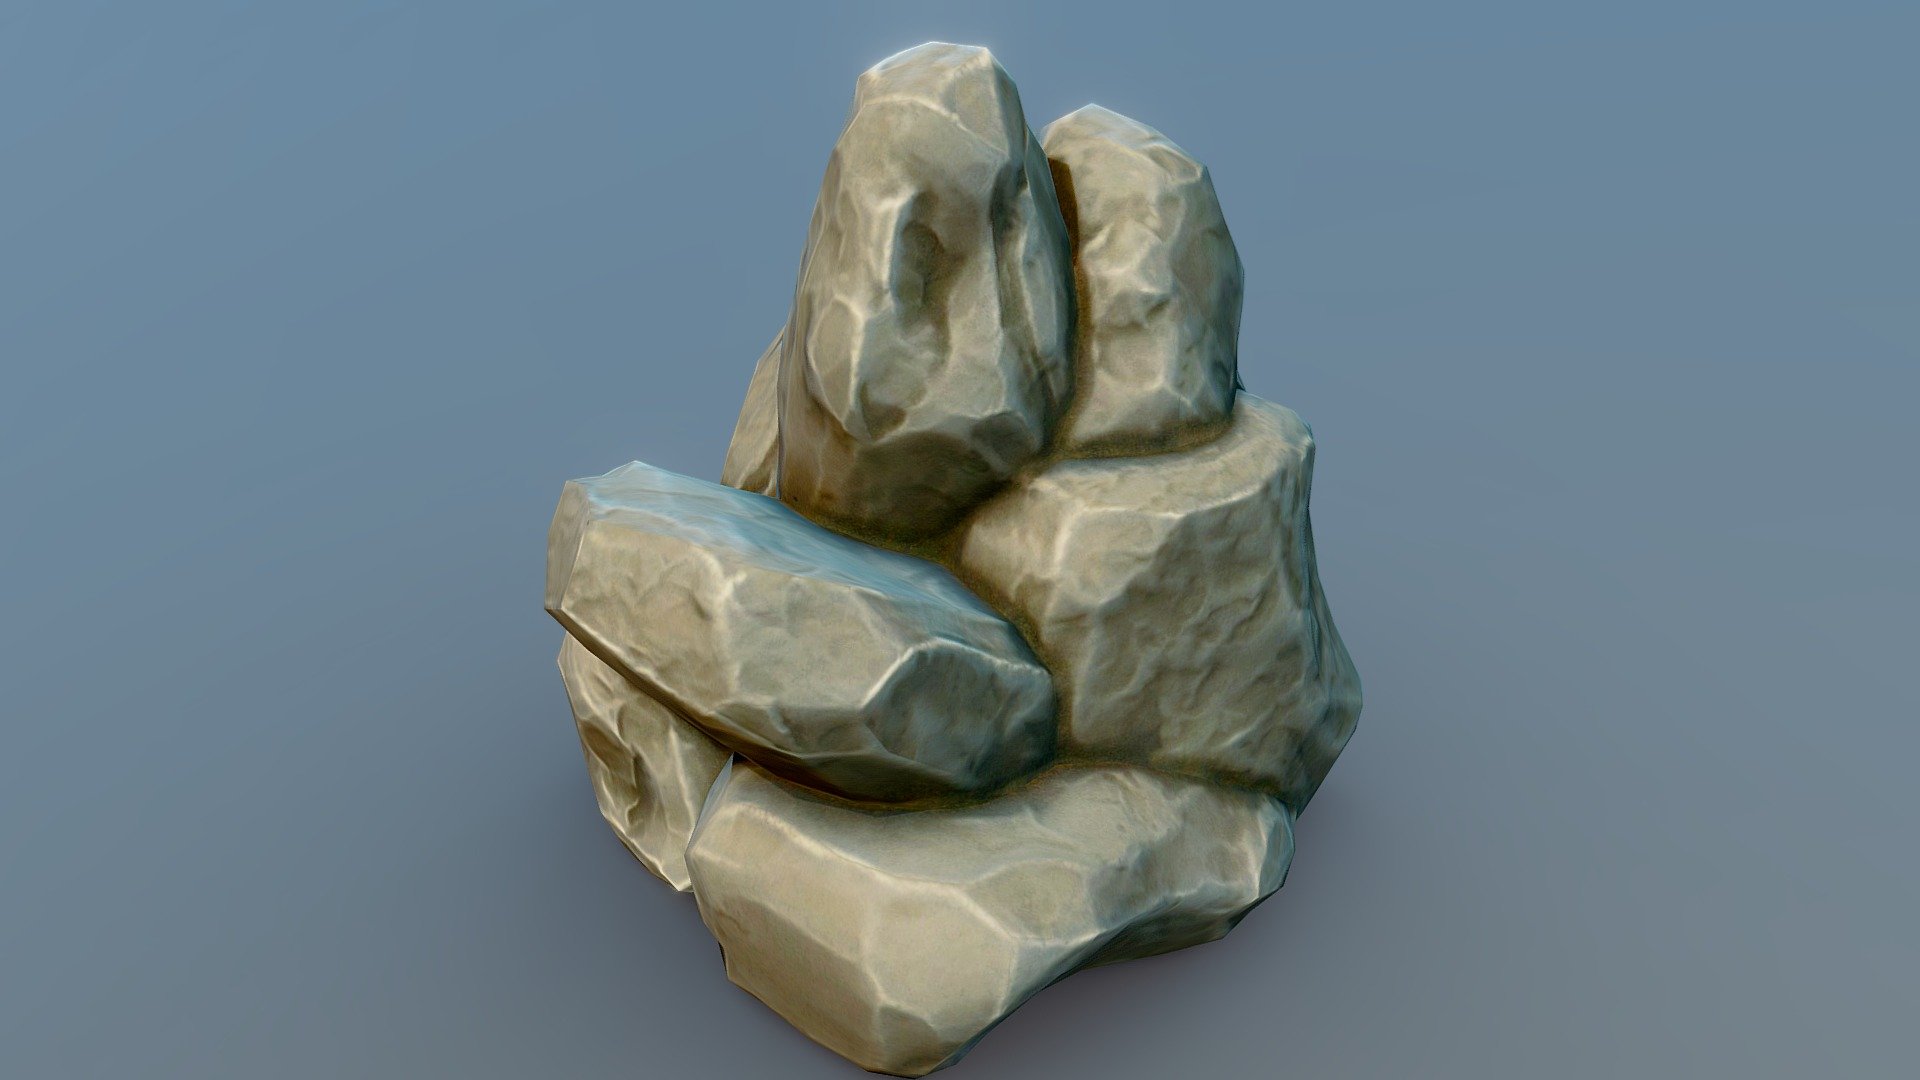 Stylized Rocks 01 - PBR

Stylized Rocks Formation perfect for game environments

Sculpted in Zbrush, Retopologized and textured in Substance Painter 3d model